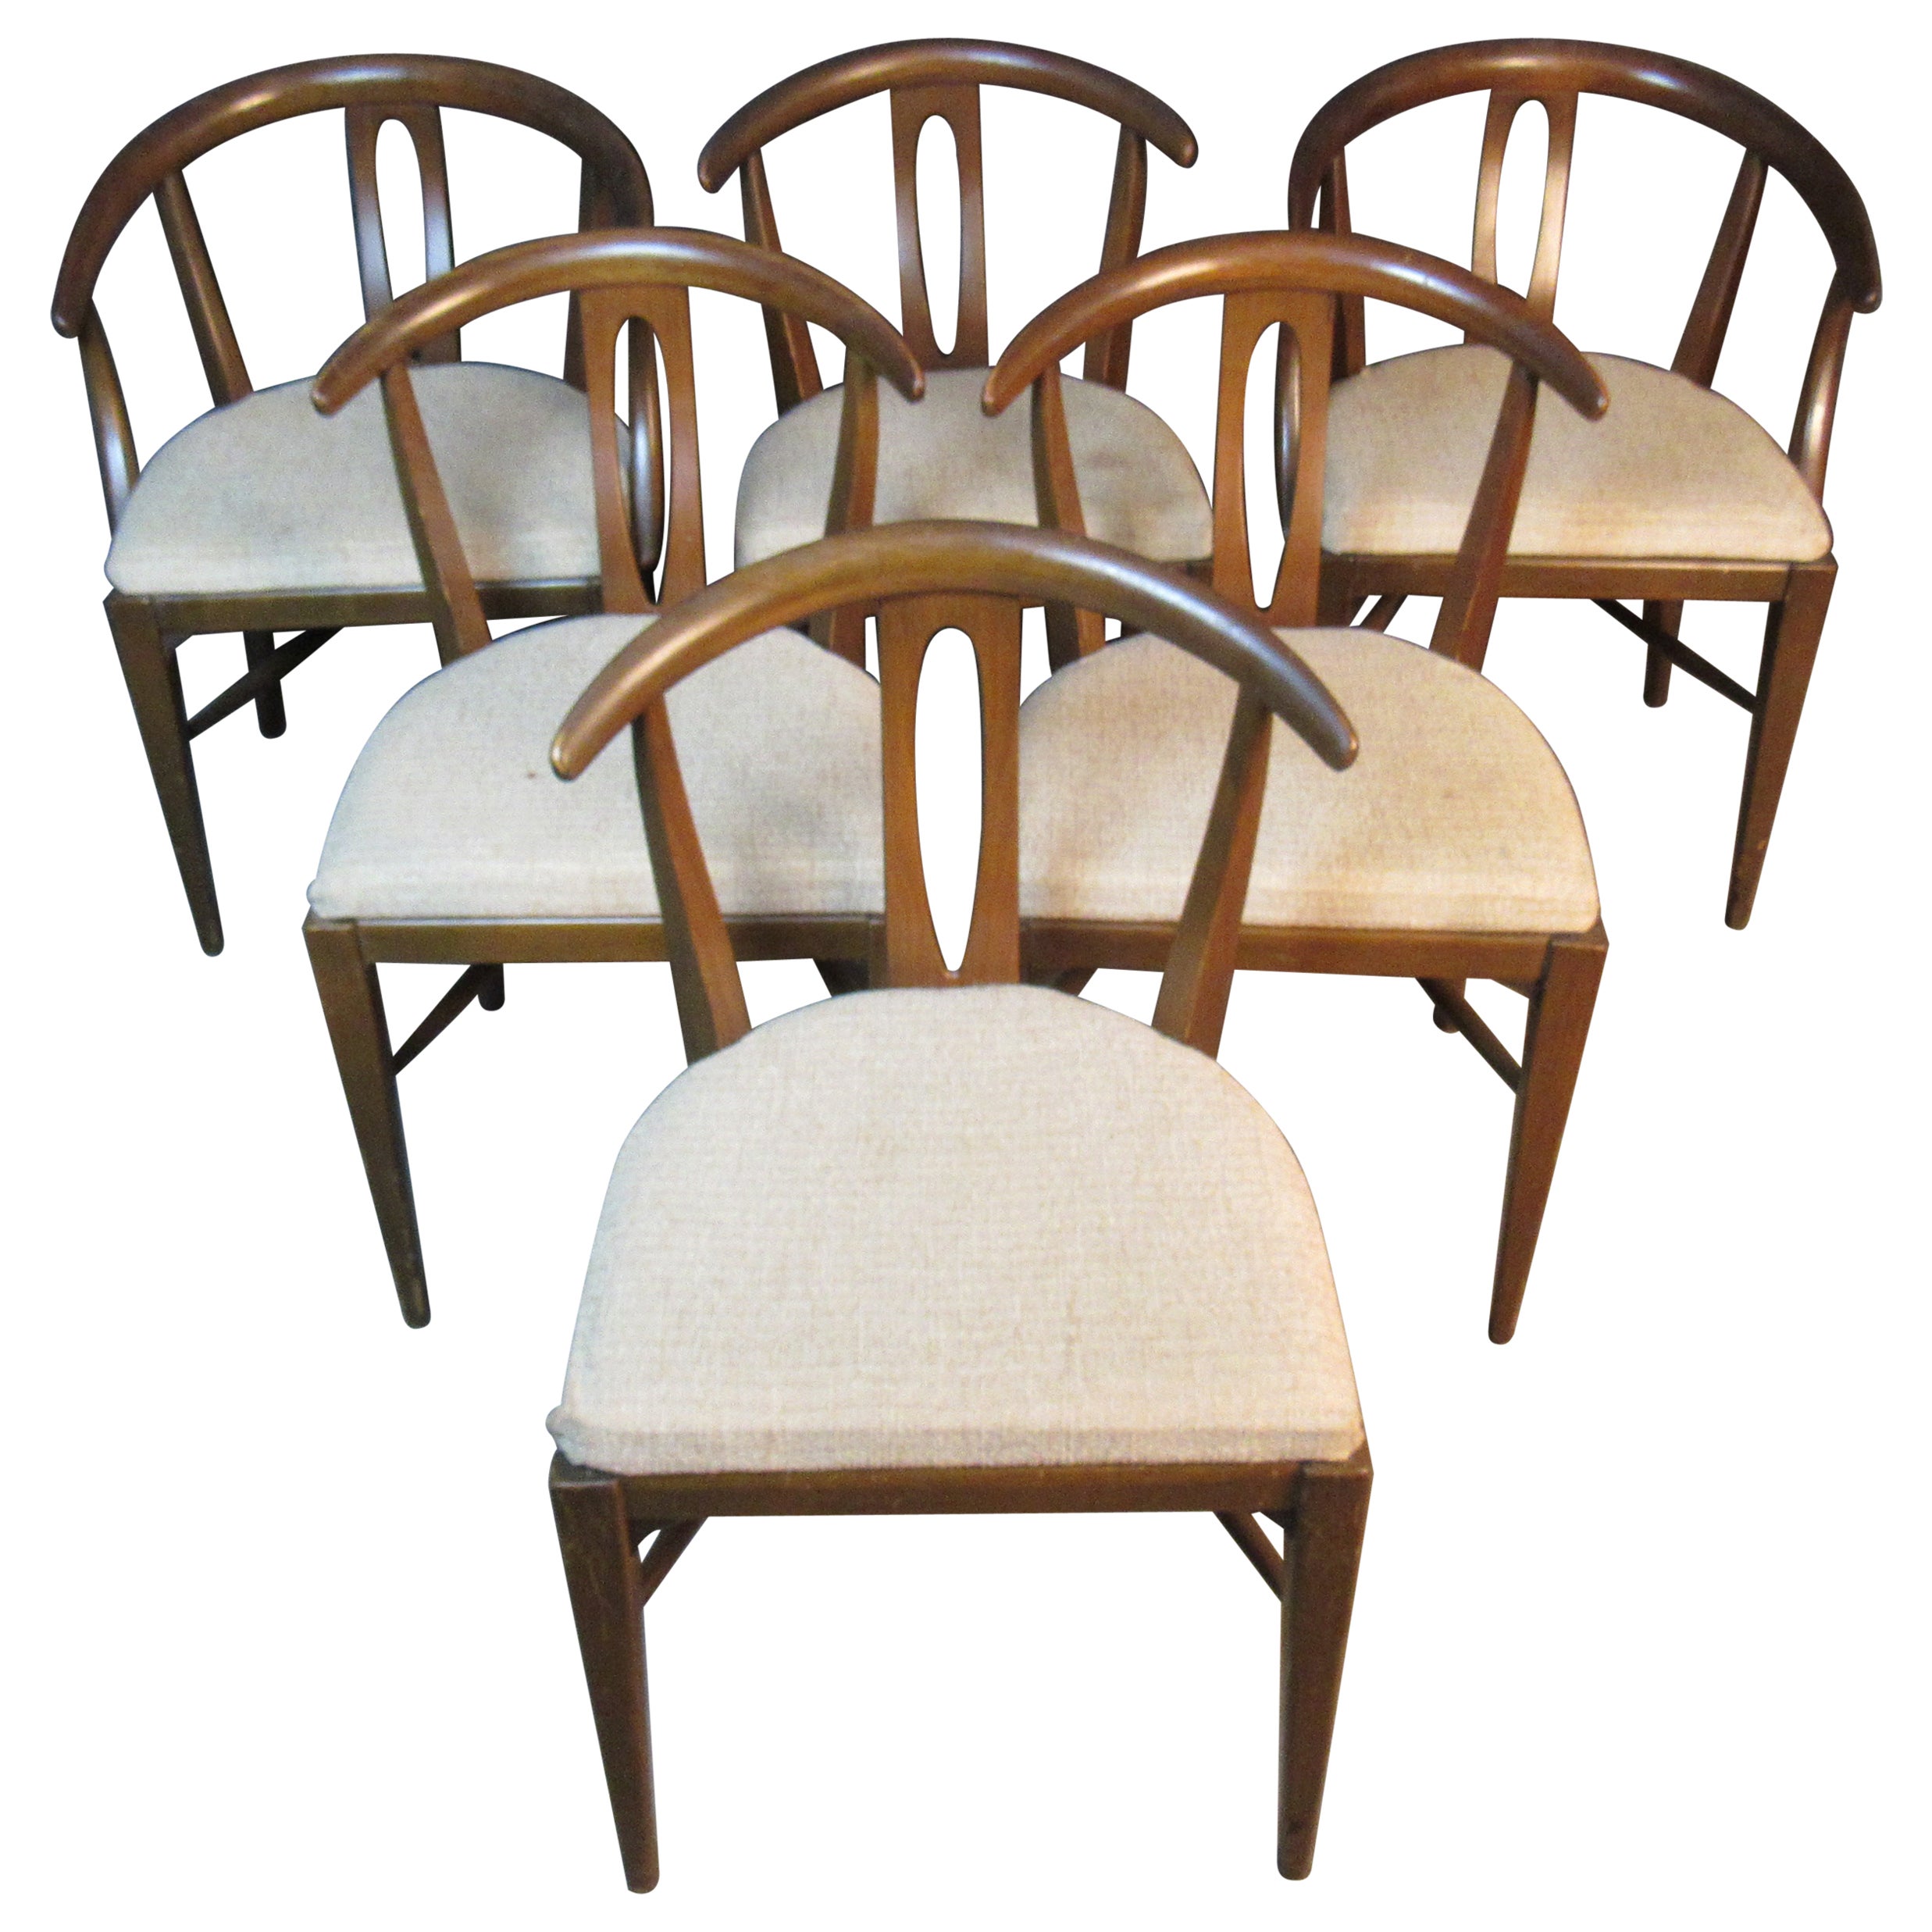 6 Vintage "Wishbone" Style Chairs by Blowing Rock Furniture For Sale